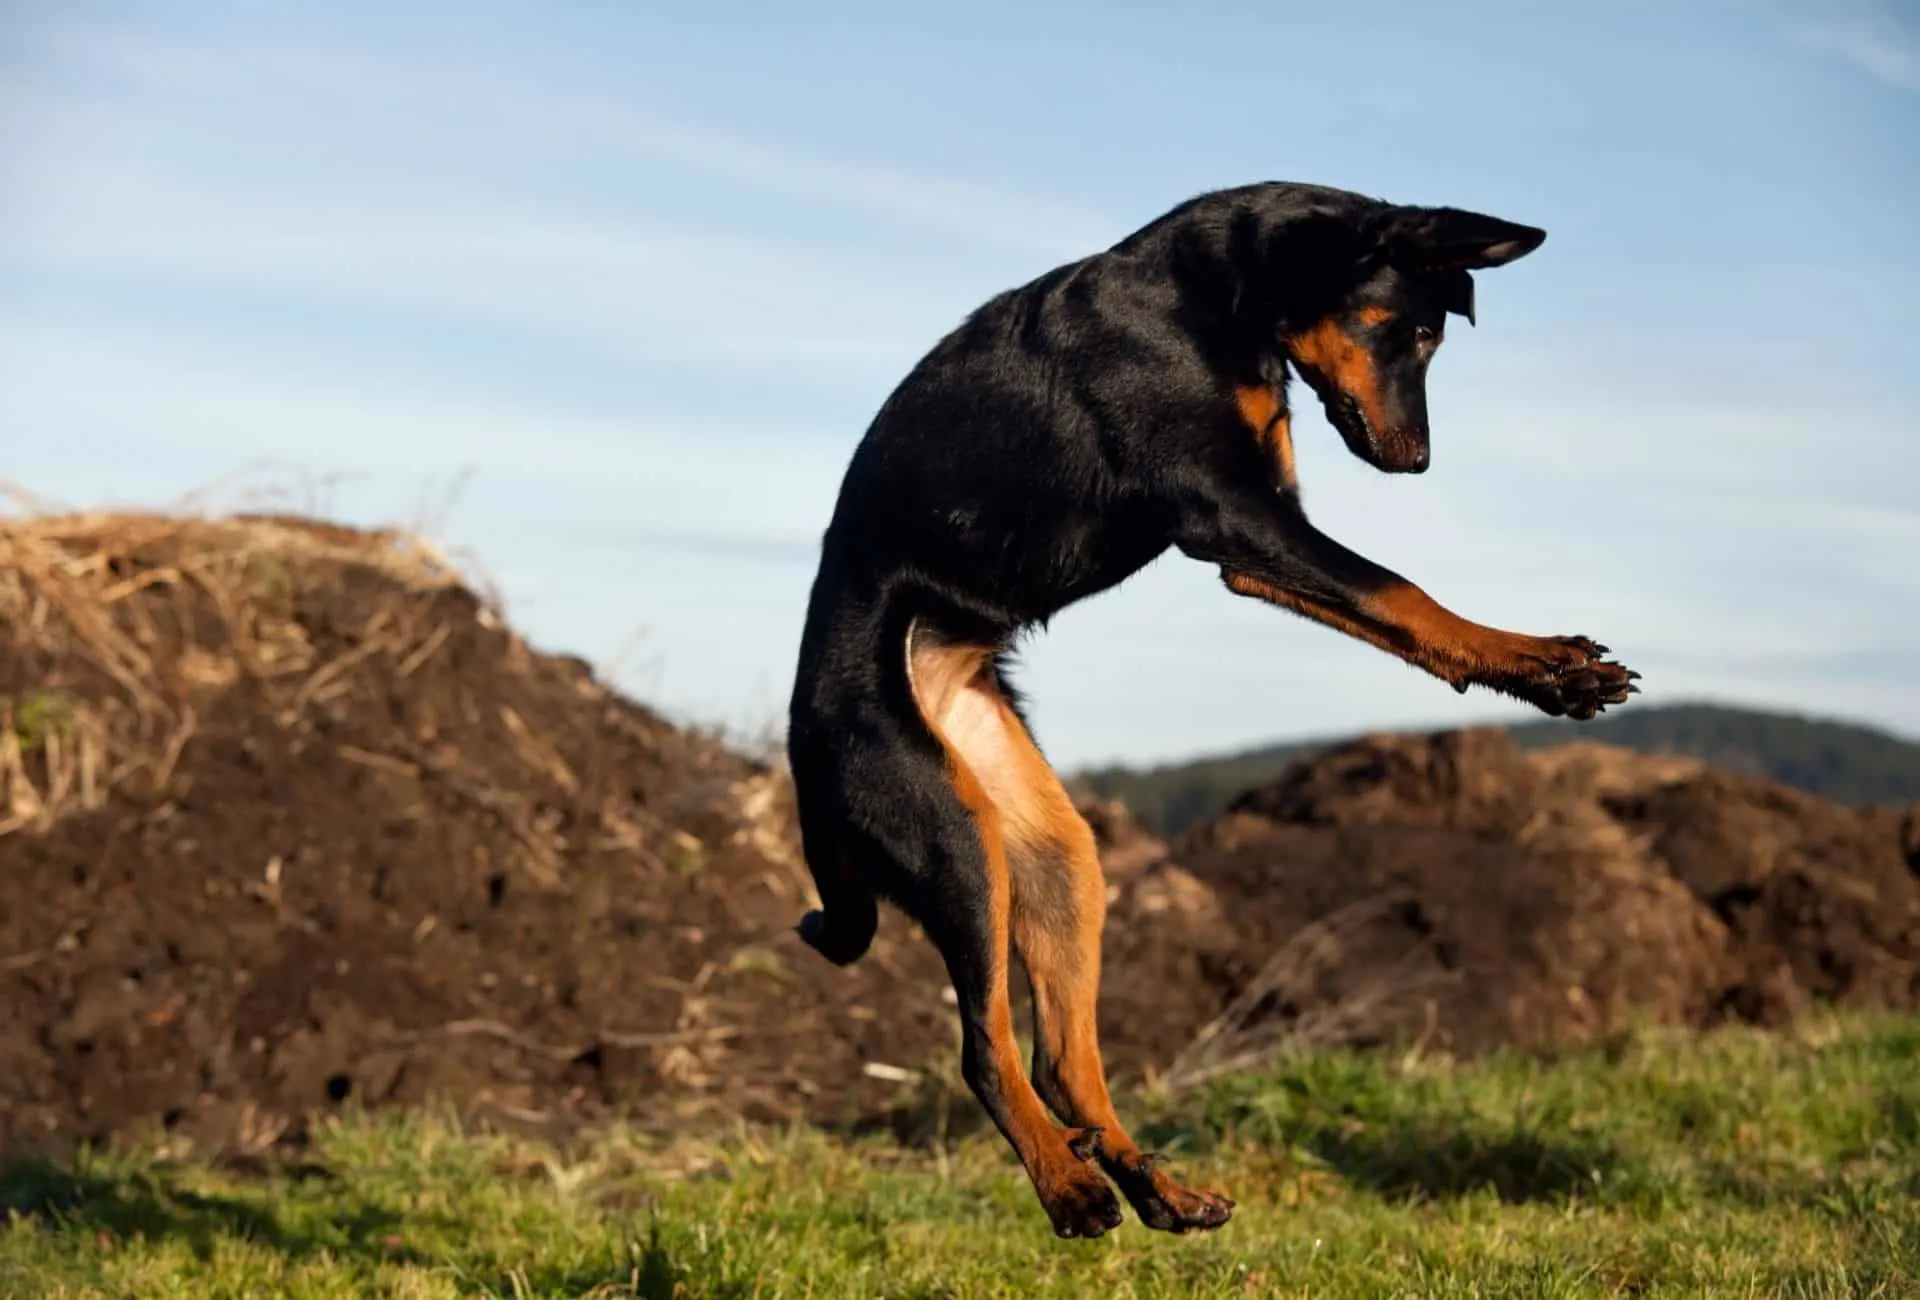 Beauceron mid-air during a jump outdoors.